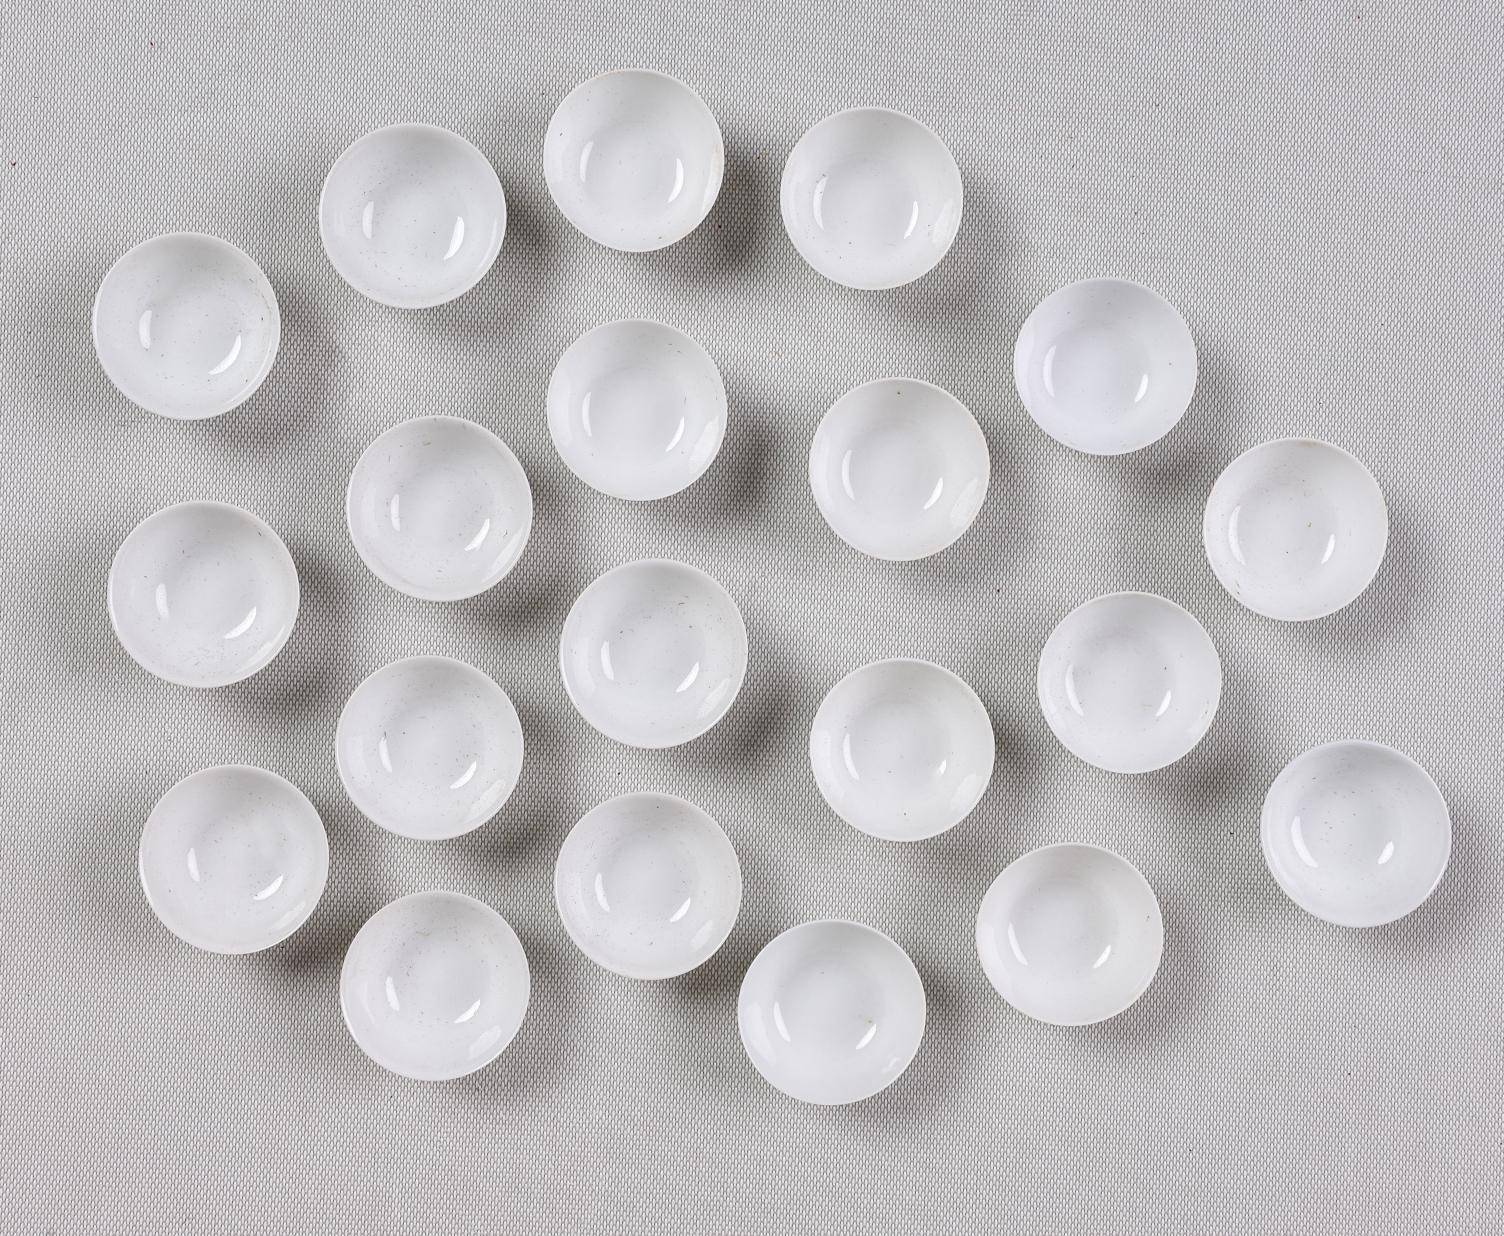 180 Small Bowls in Very Fine White Porcelain For Sale 4